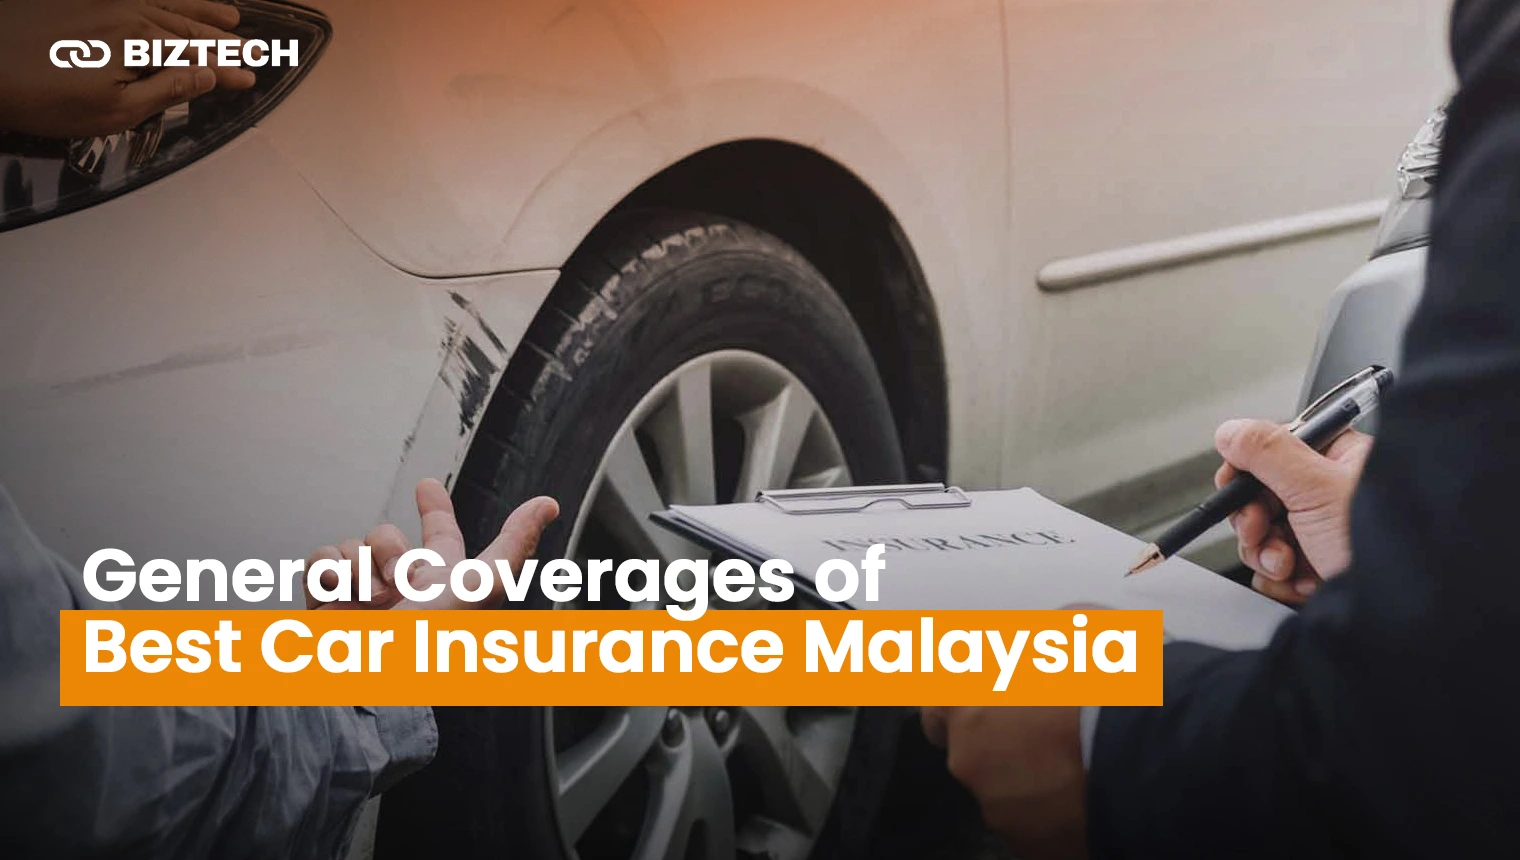 General Coverages of Best Car Insurance Malaysia